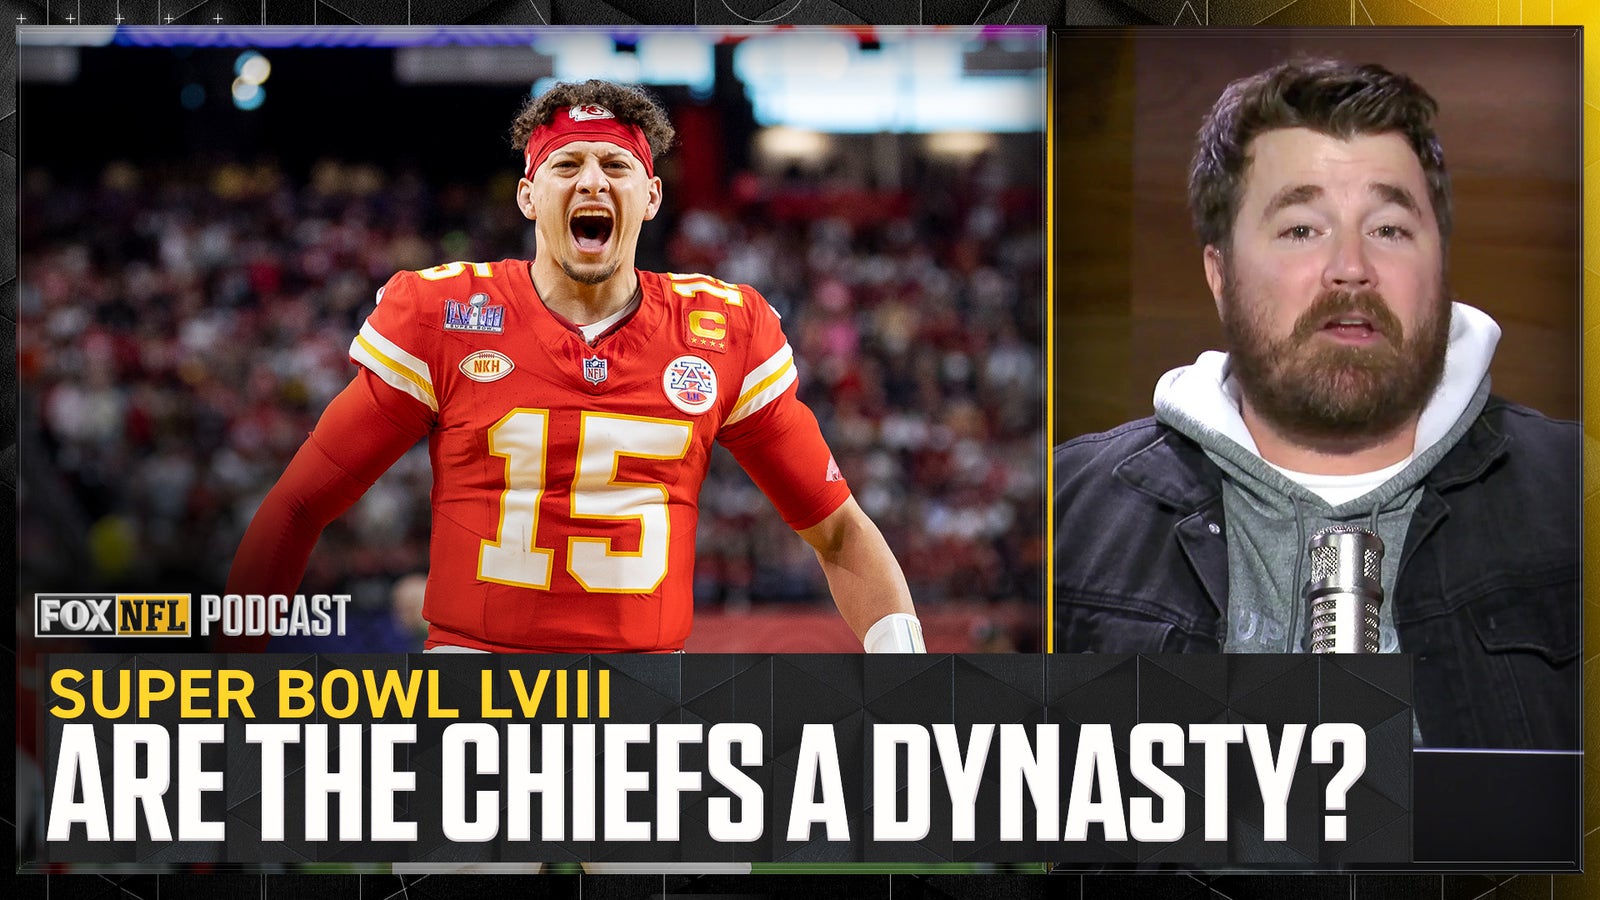 Have Chiefs become a DYNASTY with Super Bowl LVIII victory?